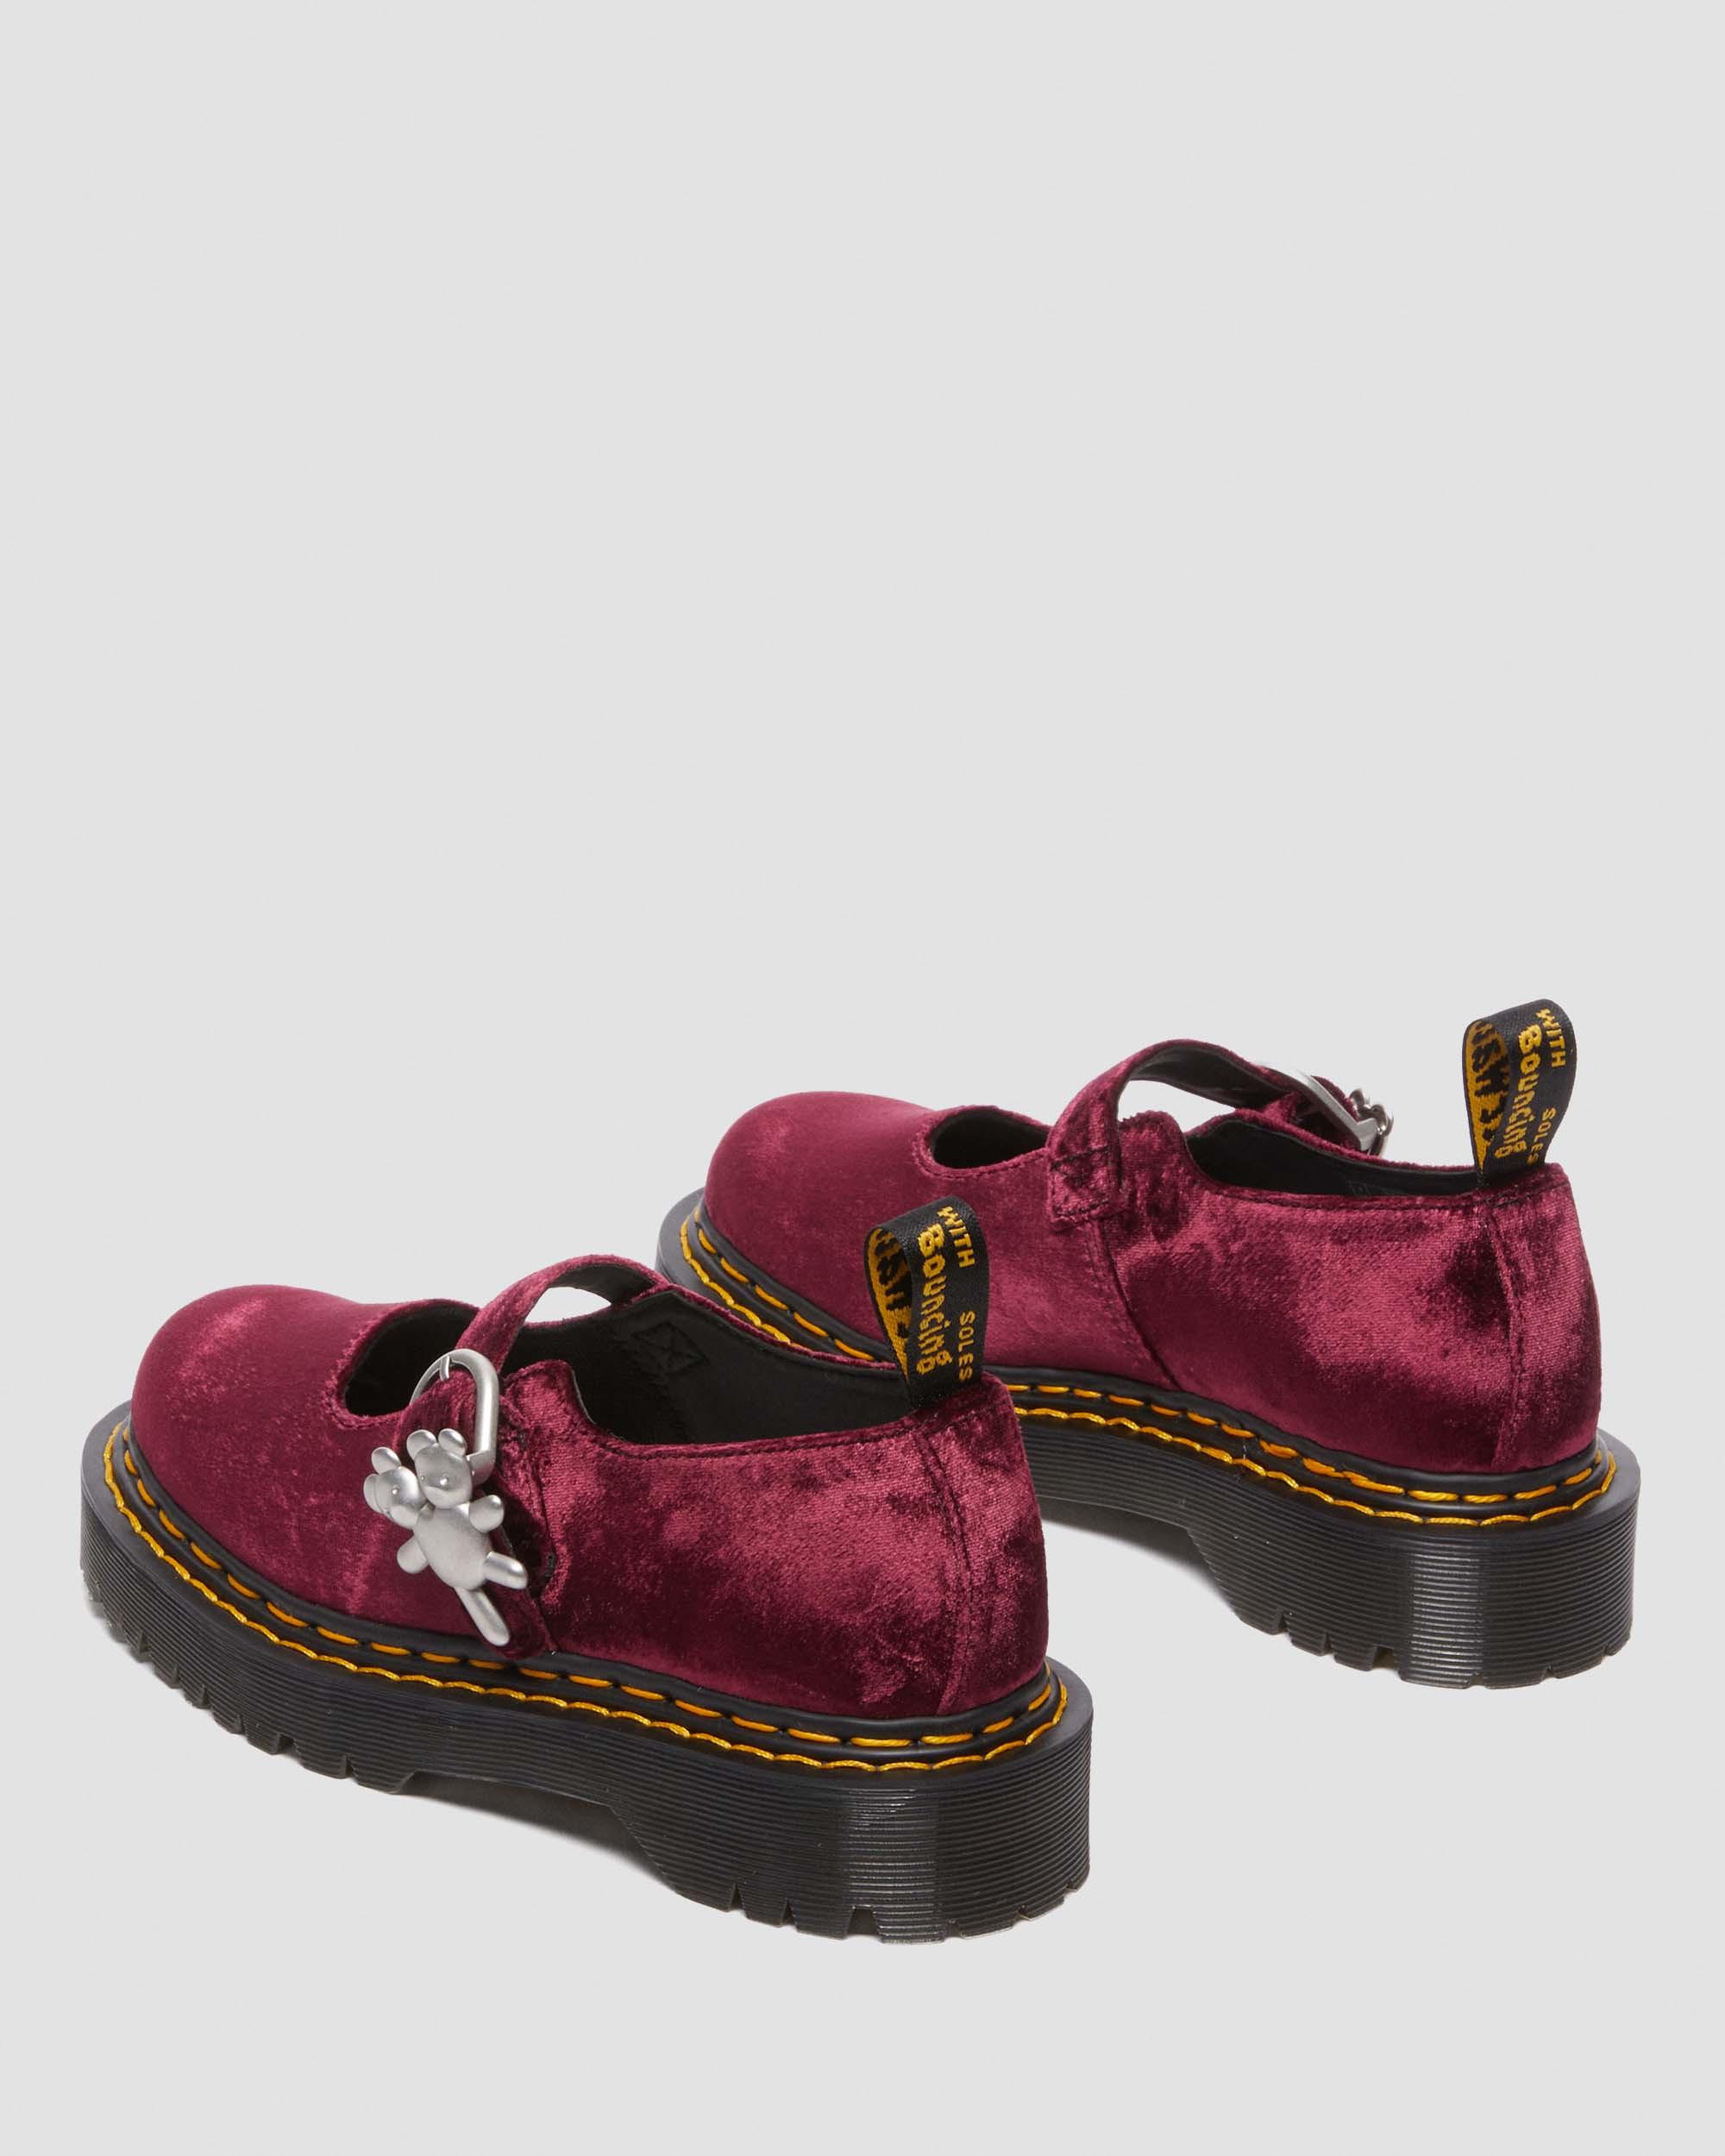 Addina Heaven by Marc Jacobs Velvet Shoes in Cherry Red